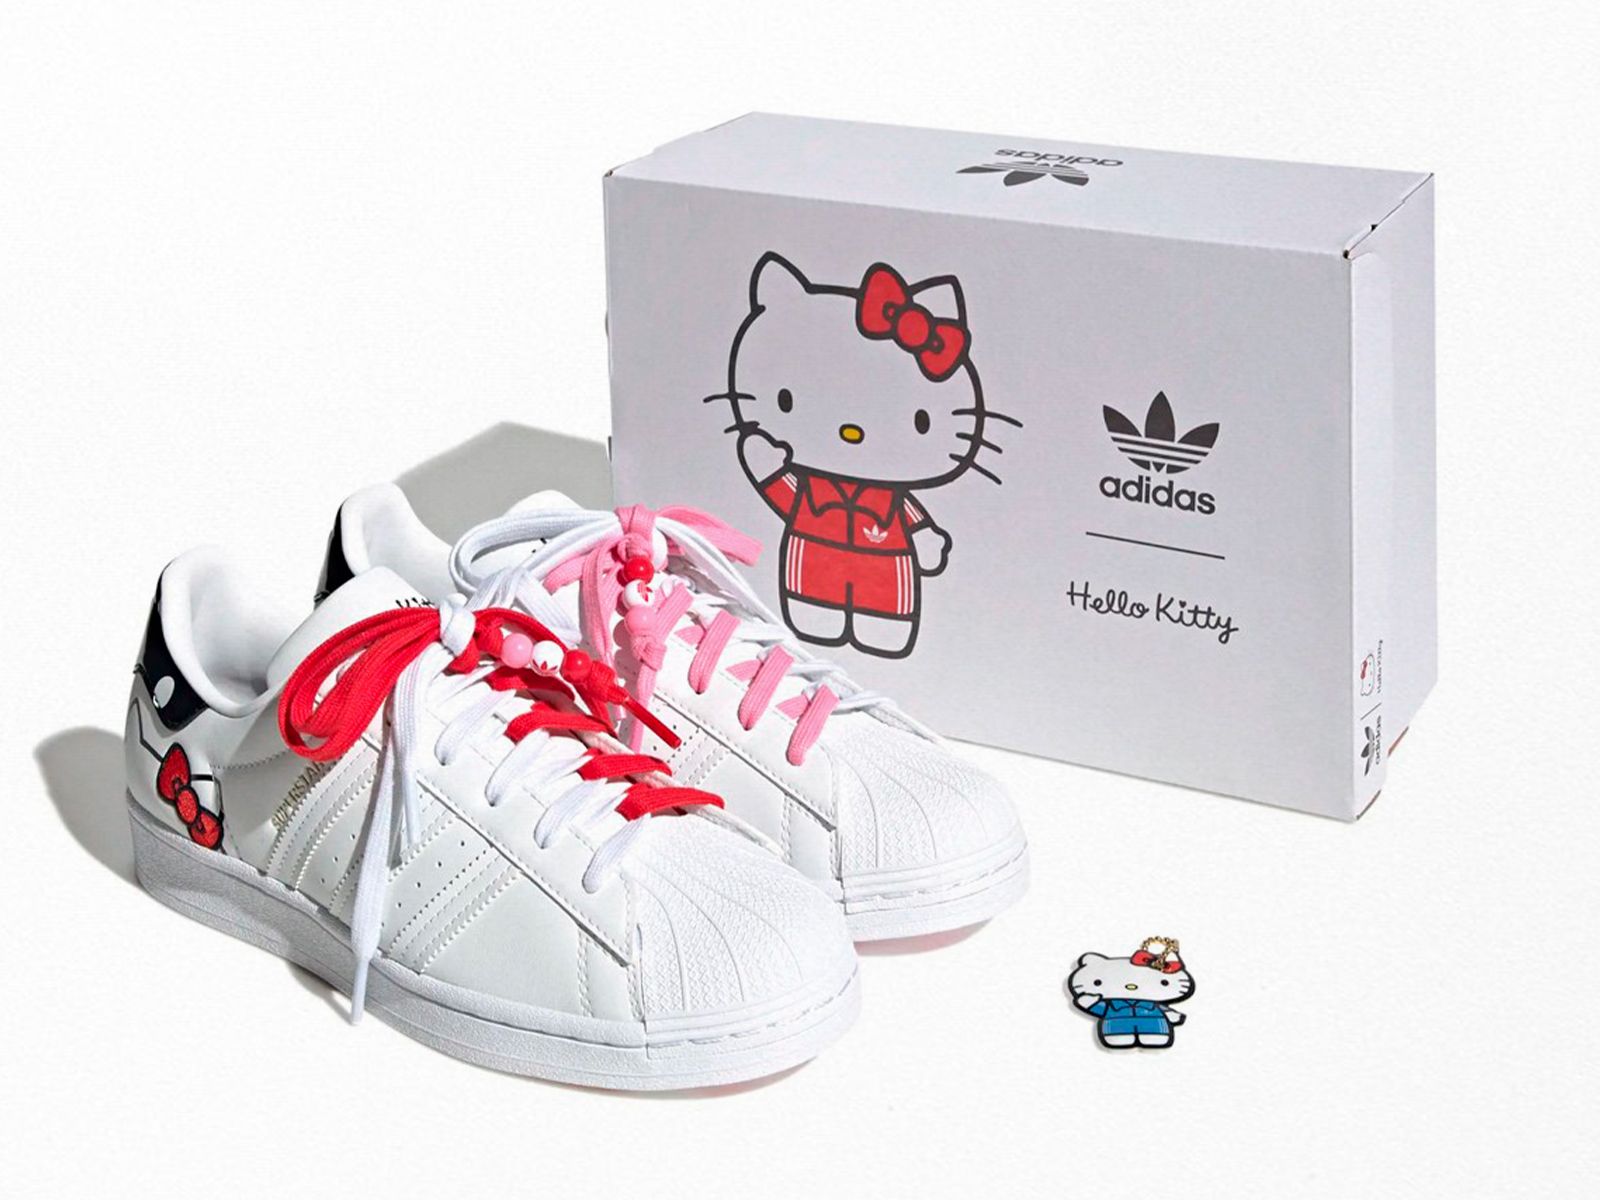 adidas reimagines three of its most classic silhouettes with Hello Kitty